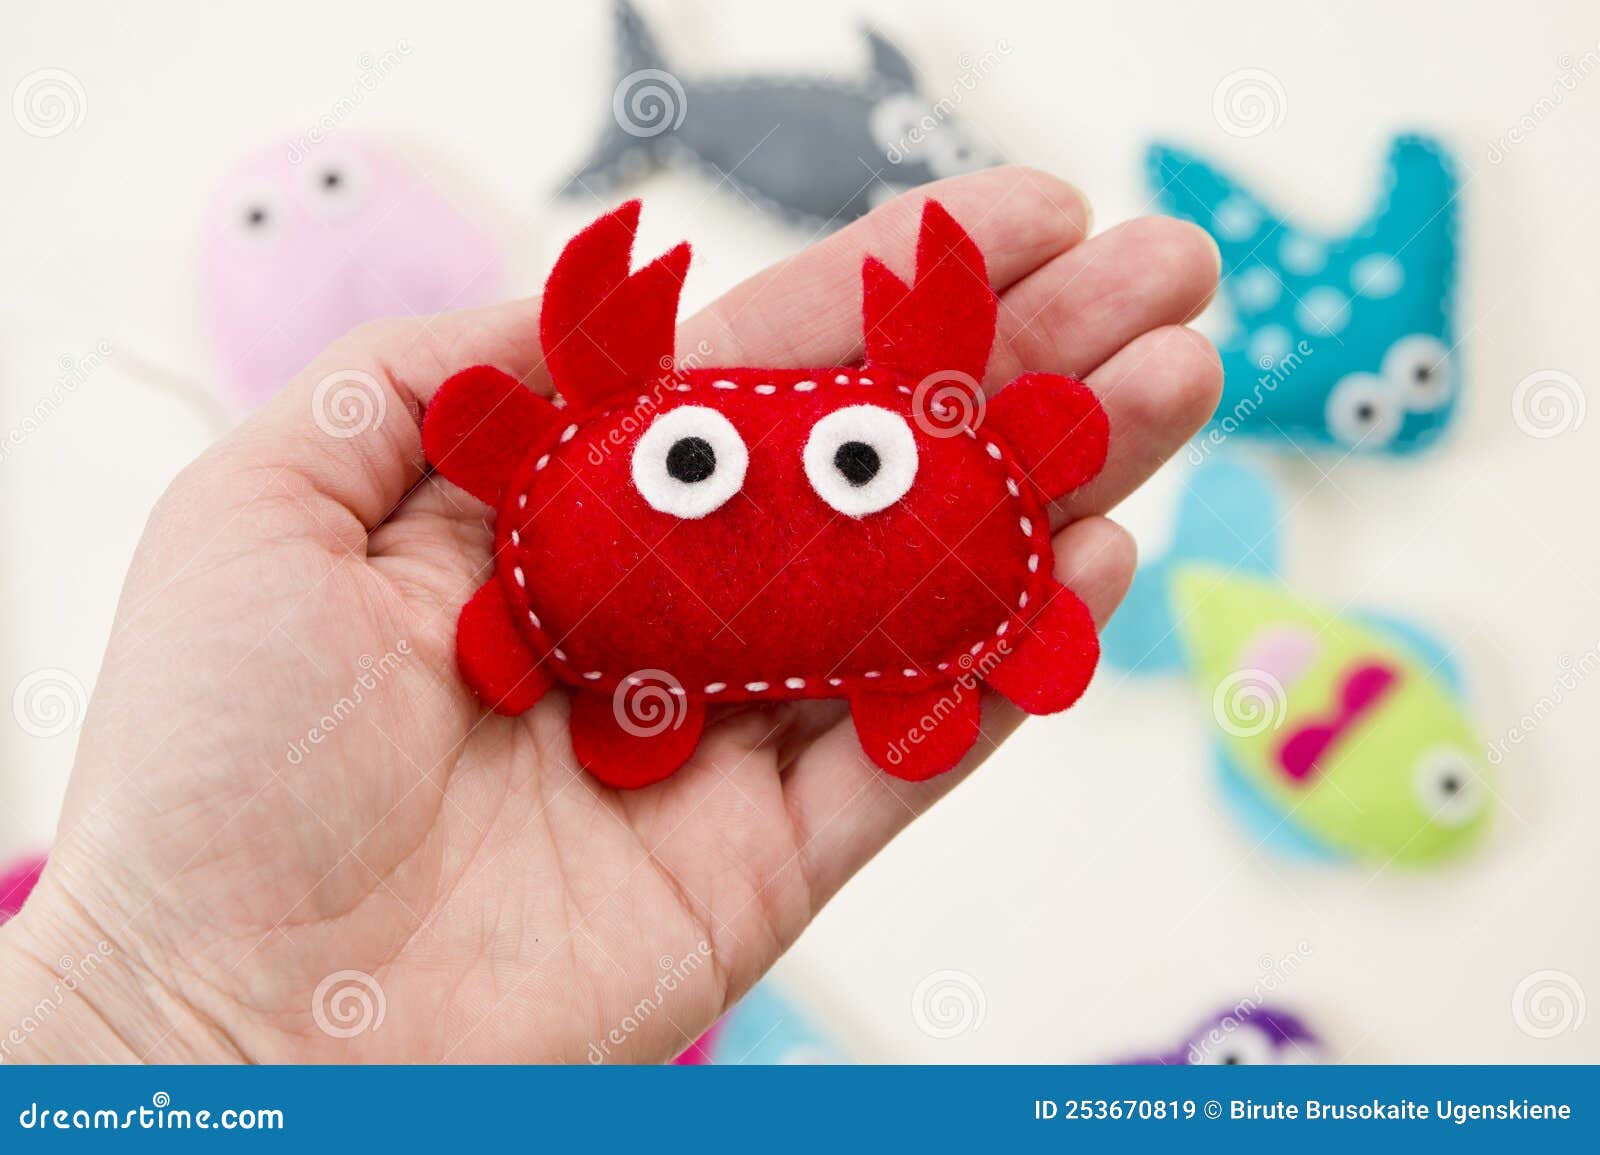 https://thumbs.dreamstime.com/z/hand-made-stuffed-felt-toy-fishing-rod-magnet-fishes-other-sea-animals-different-colors-safe-eco-stuffed-toy-253670819.jpg